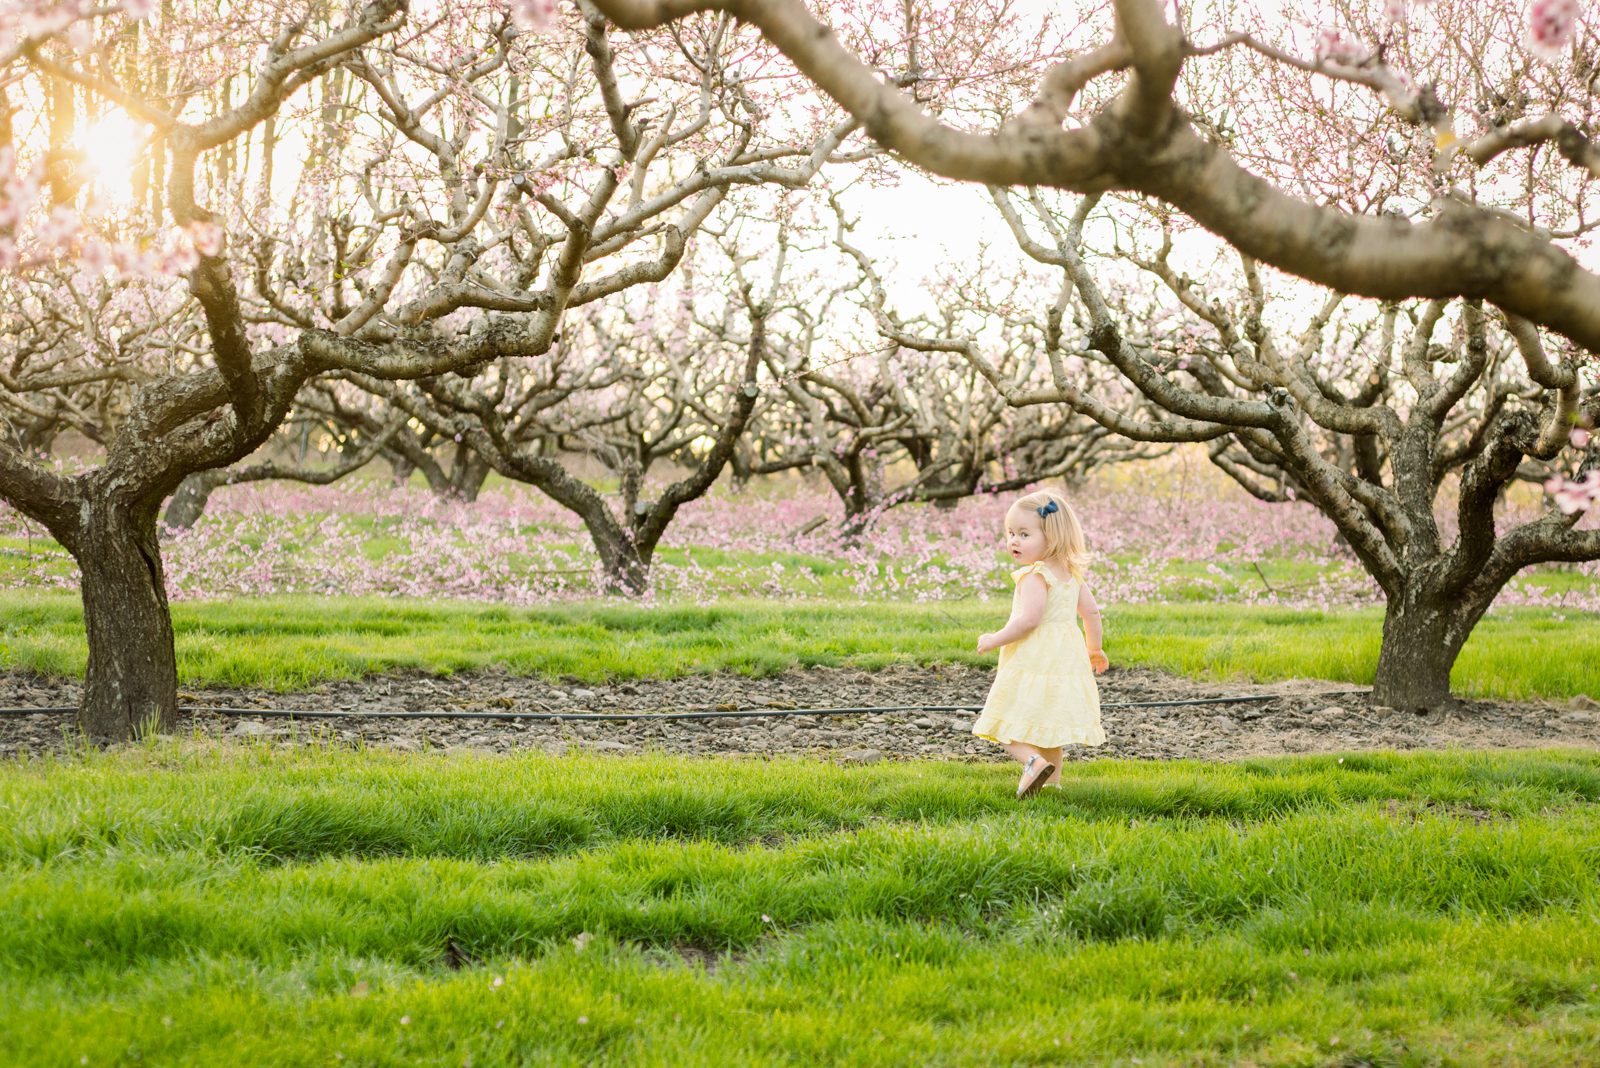 a young girl running through an orchard full of peach trees covered in pink blossoms and as she looks over her shoulder at the camera during a spring photo session